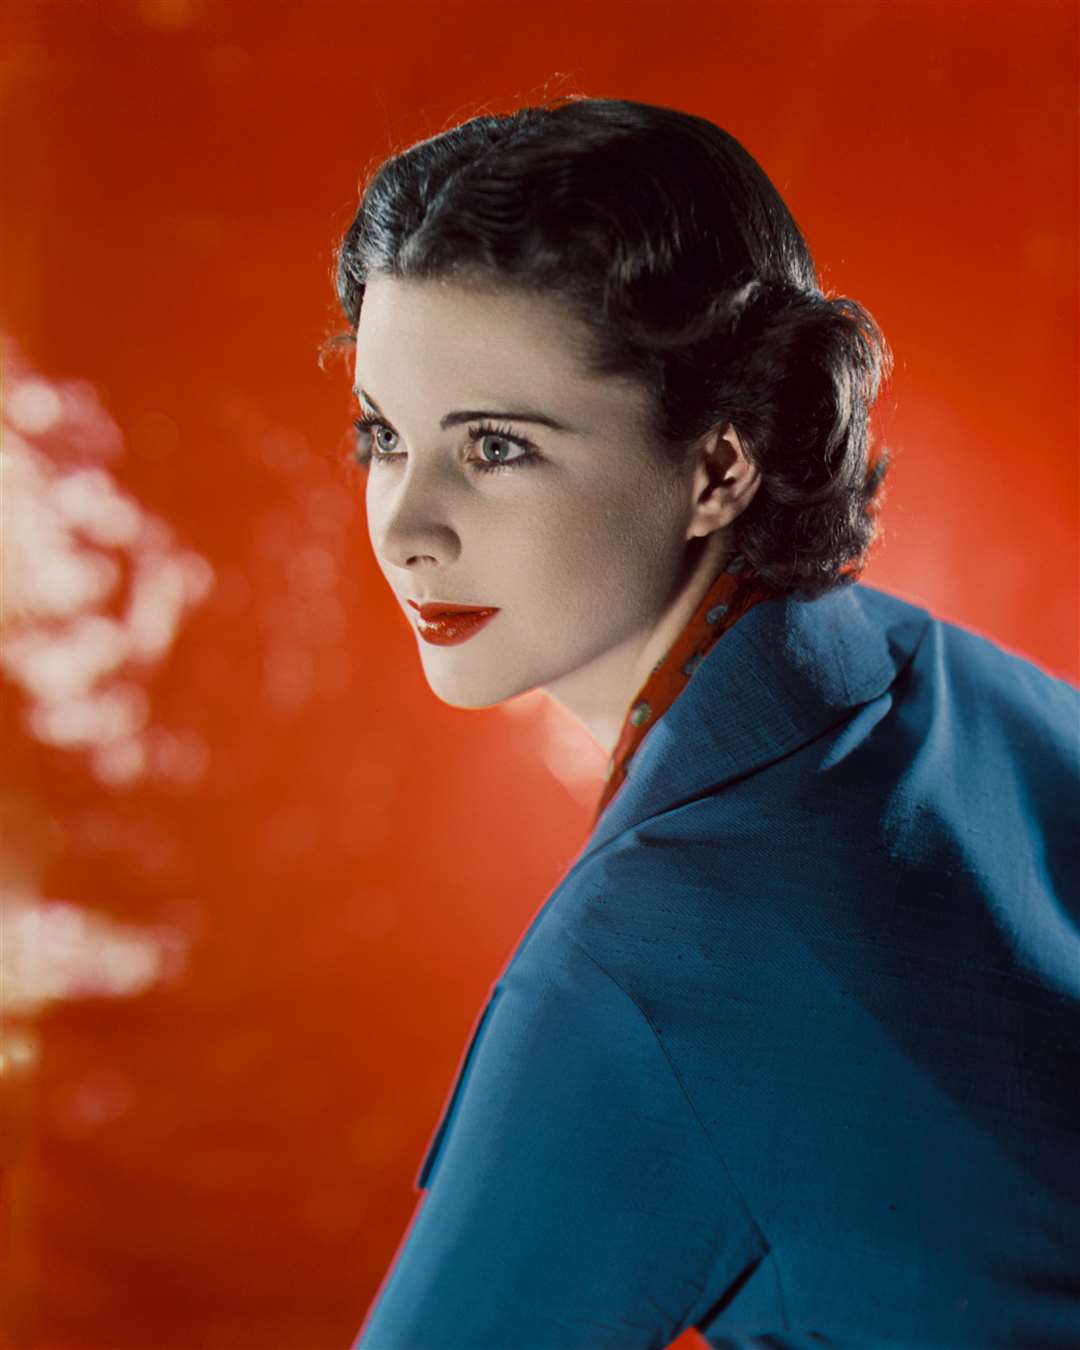 Vivien Leigh by Yevonde in 1936 (National Portrait Gallery/PA)